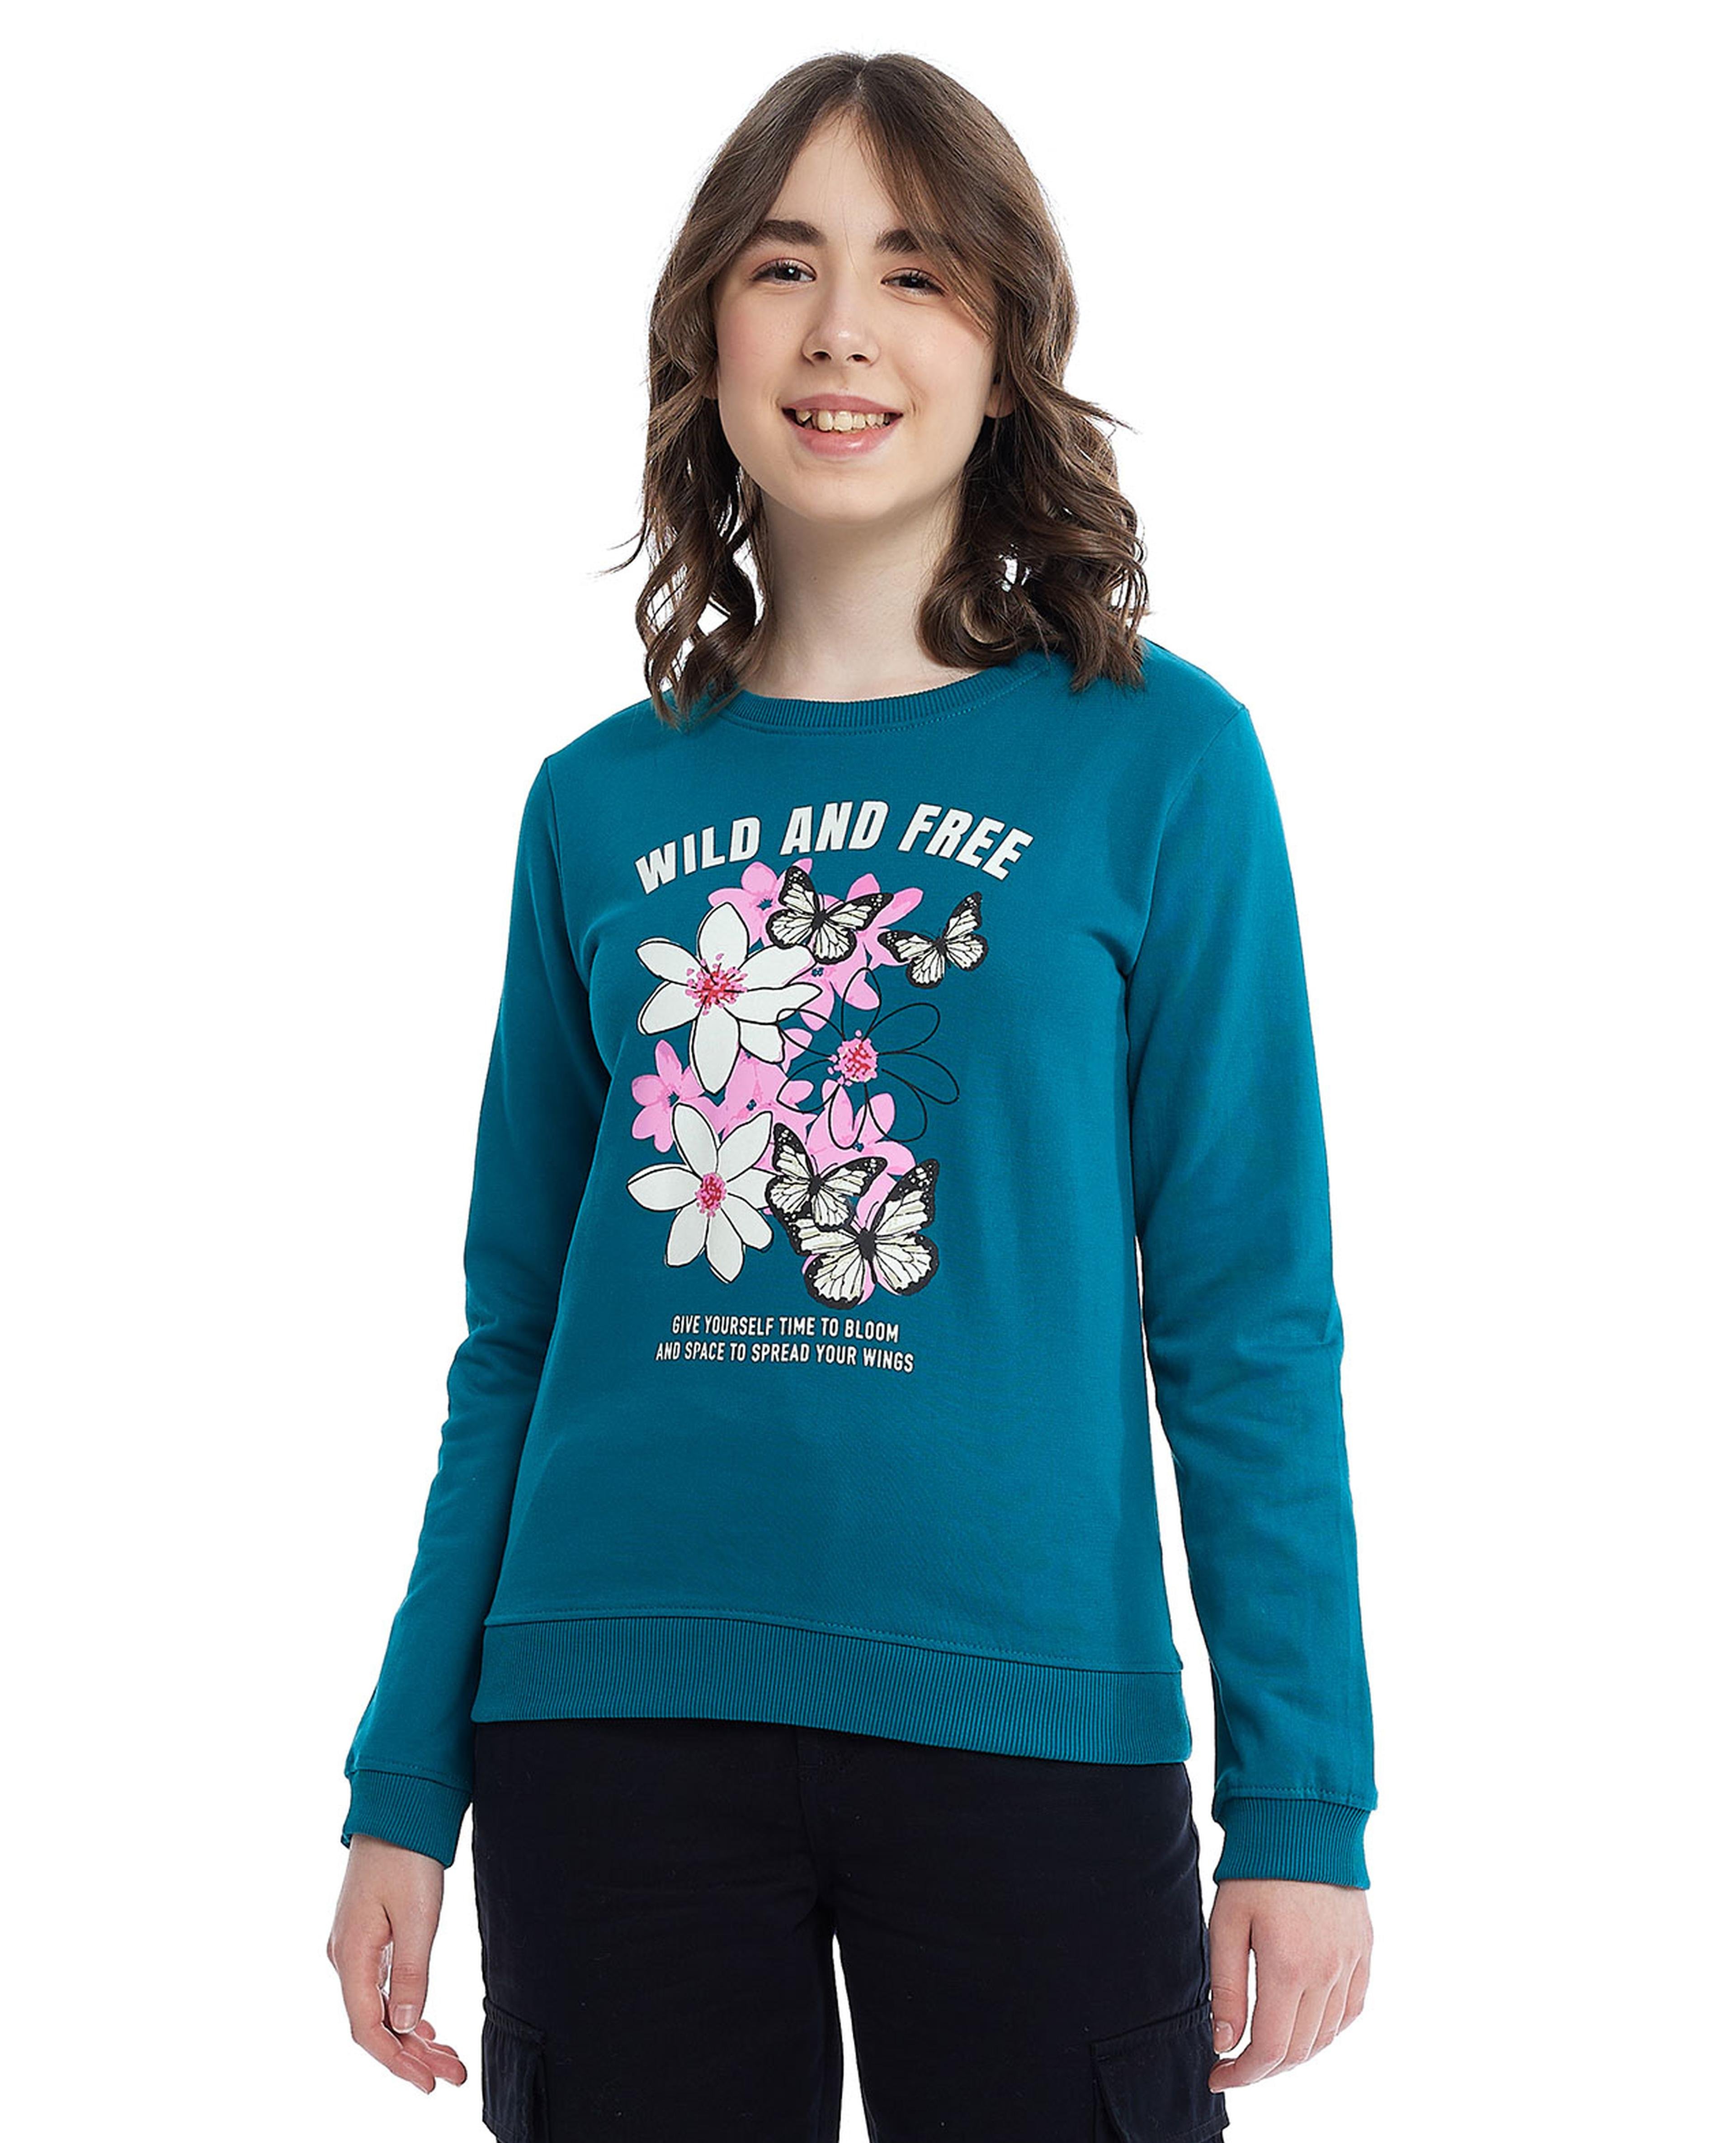 Printed Sweatshirt with Crew neck and Long Sleeves